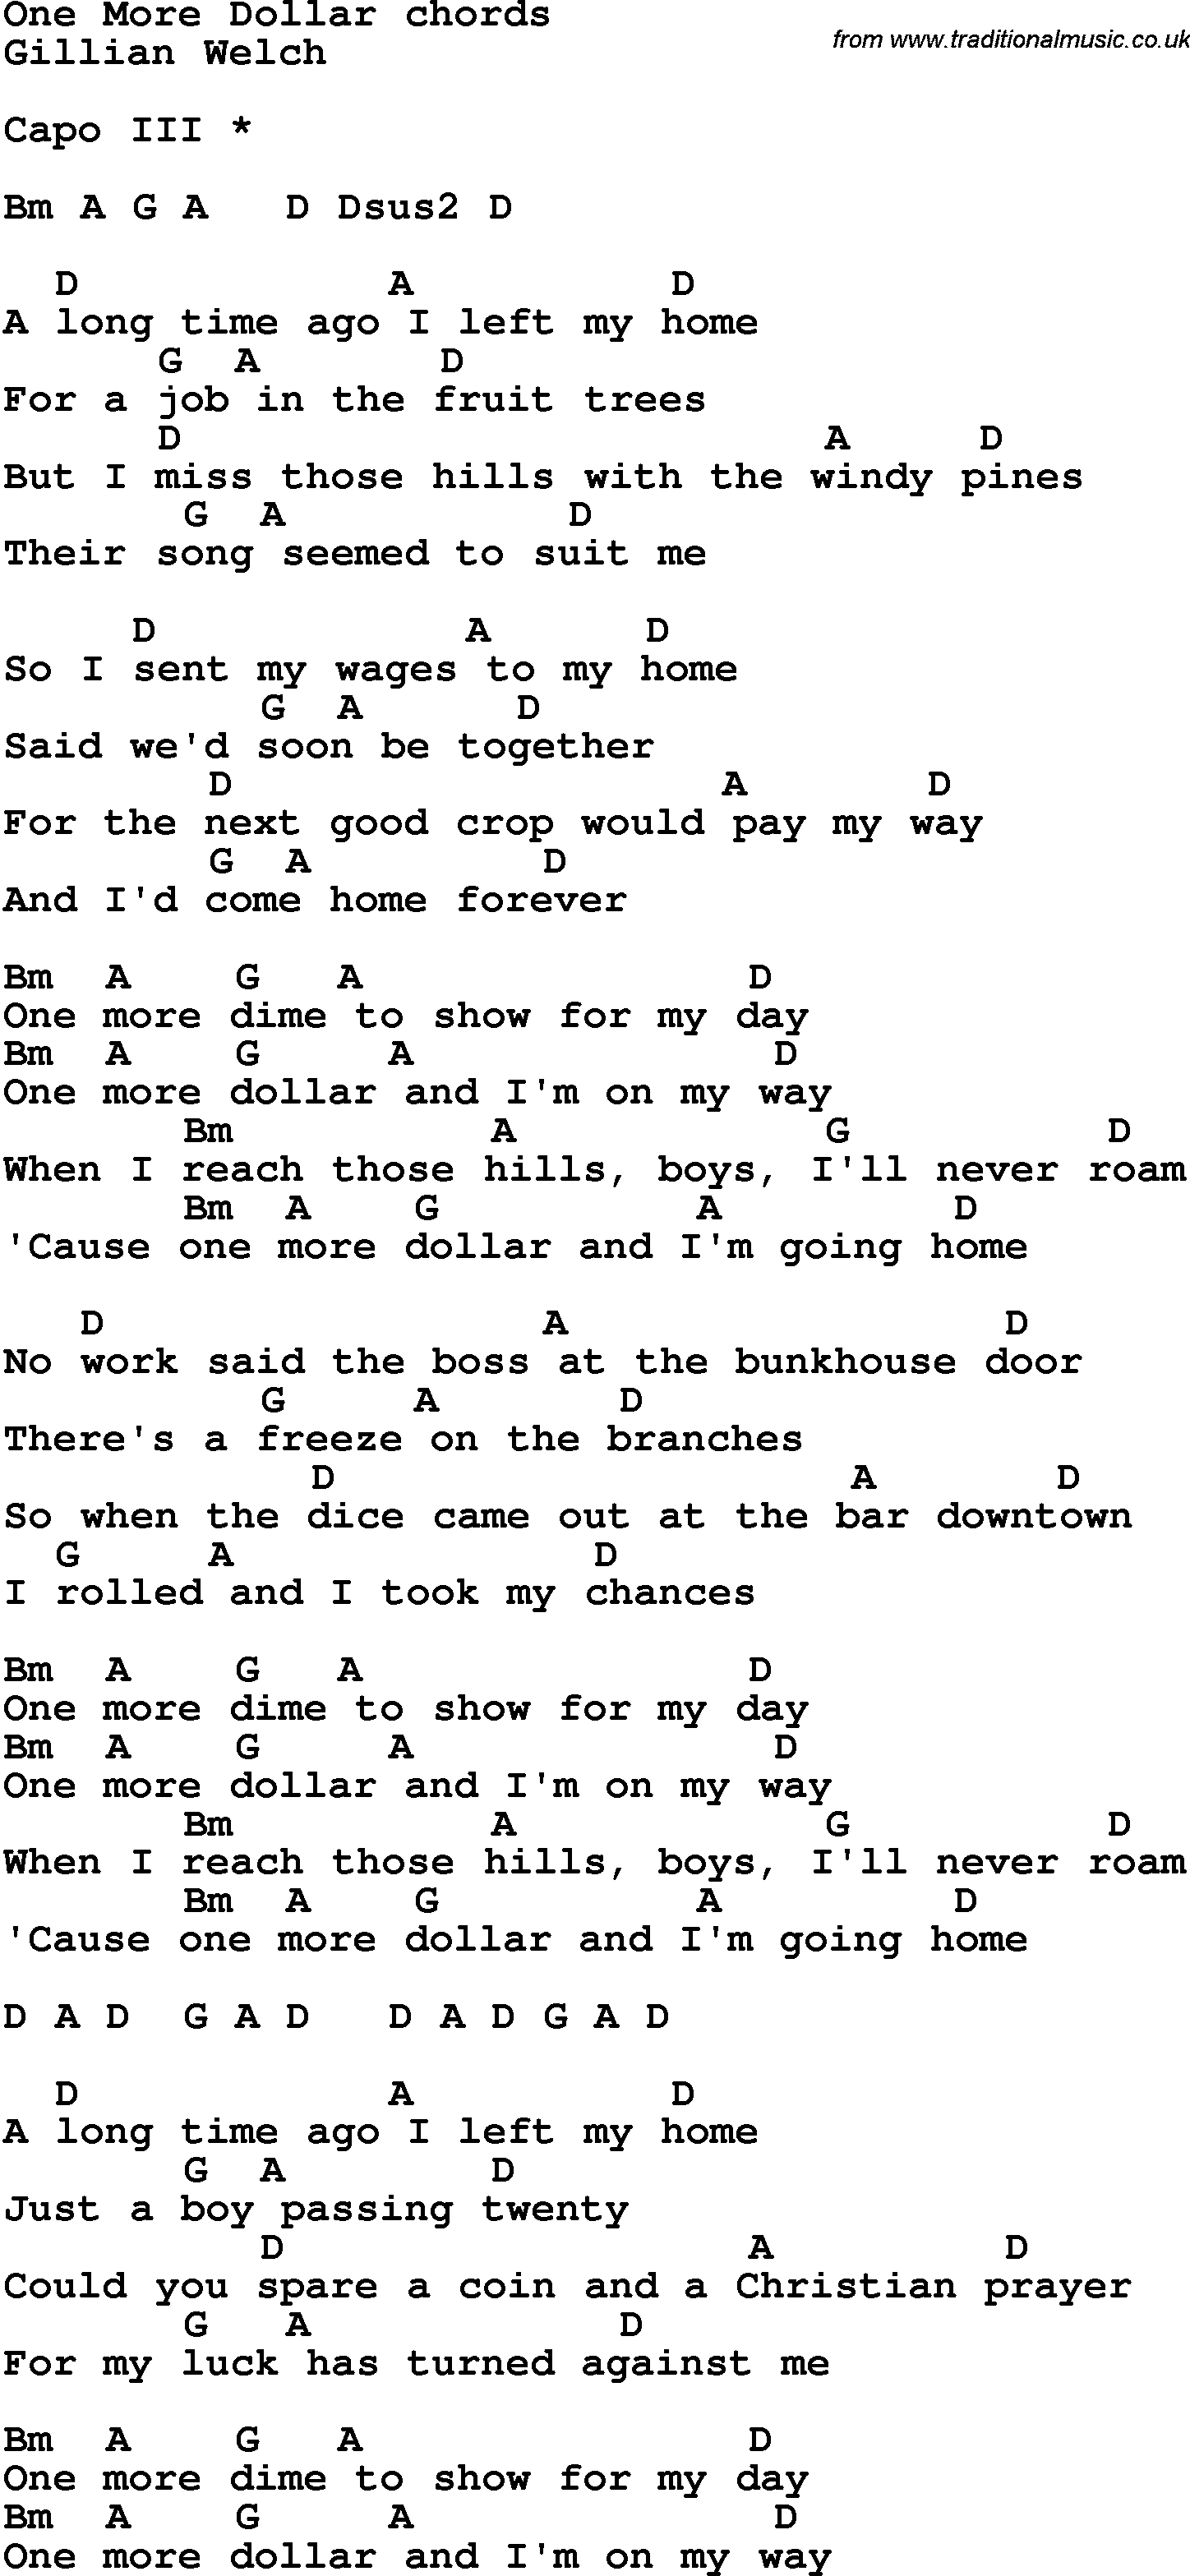 Song Lyrics with guitar chords for One More Dollar